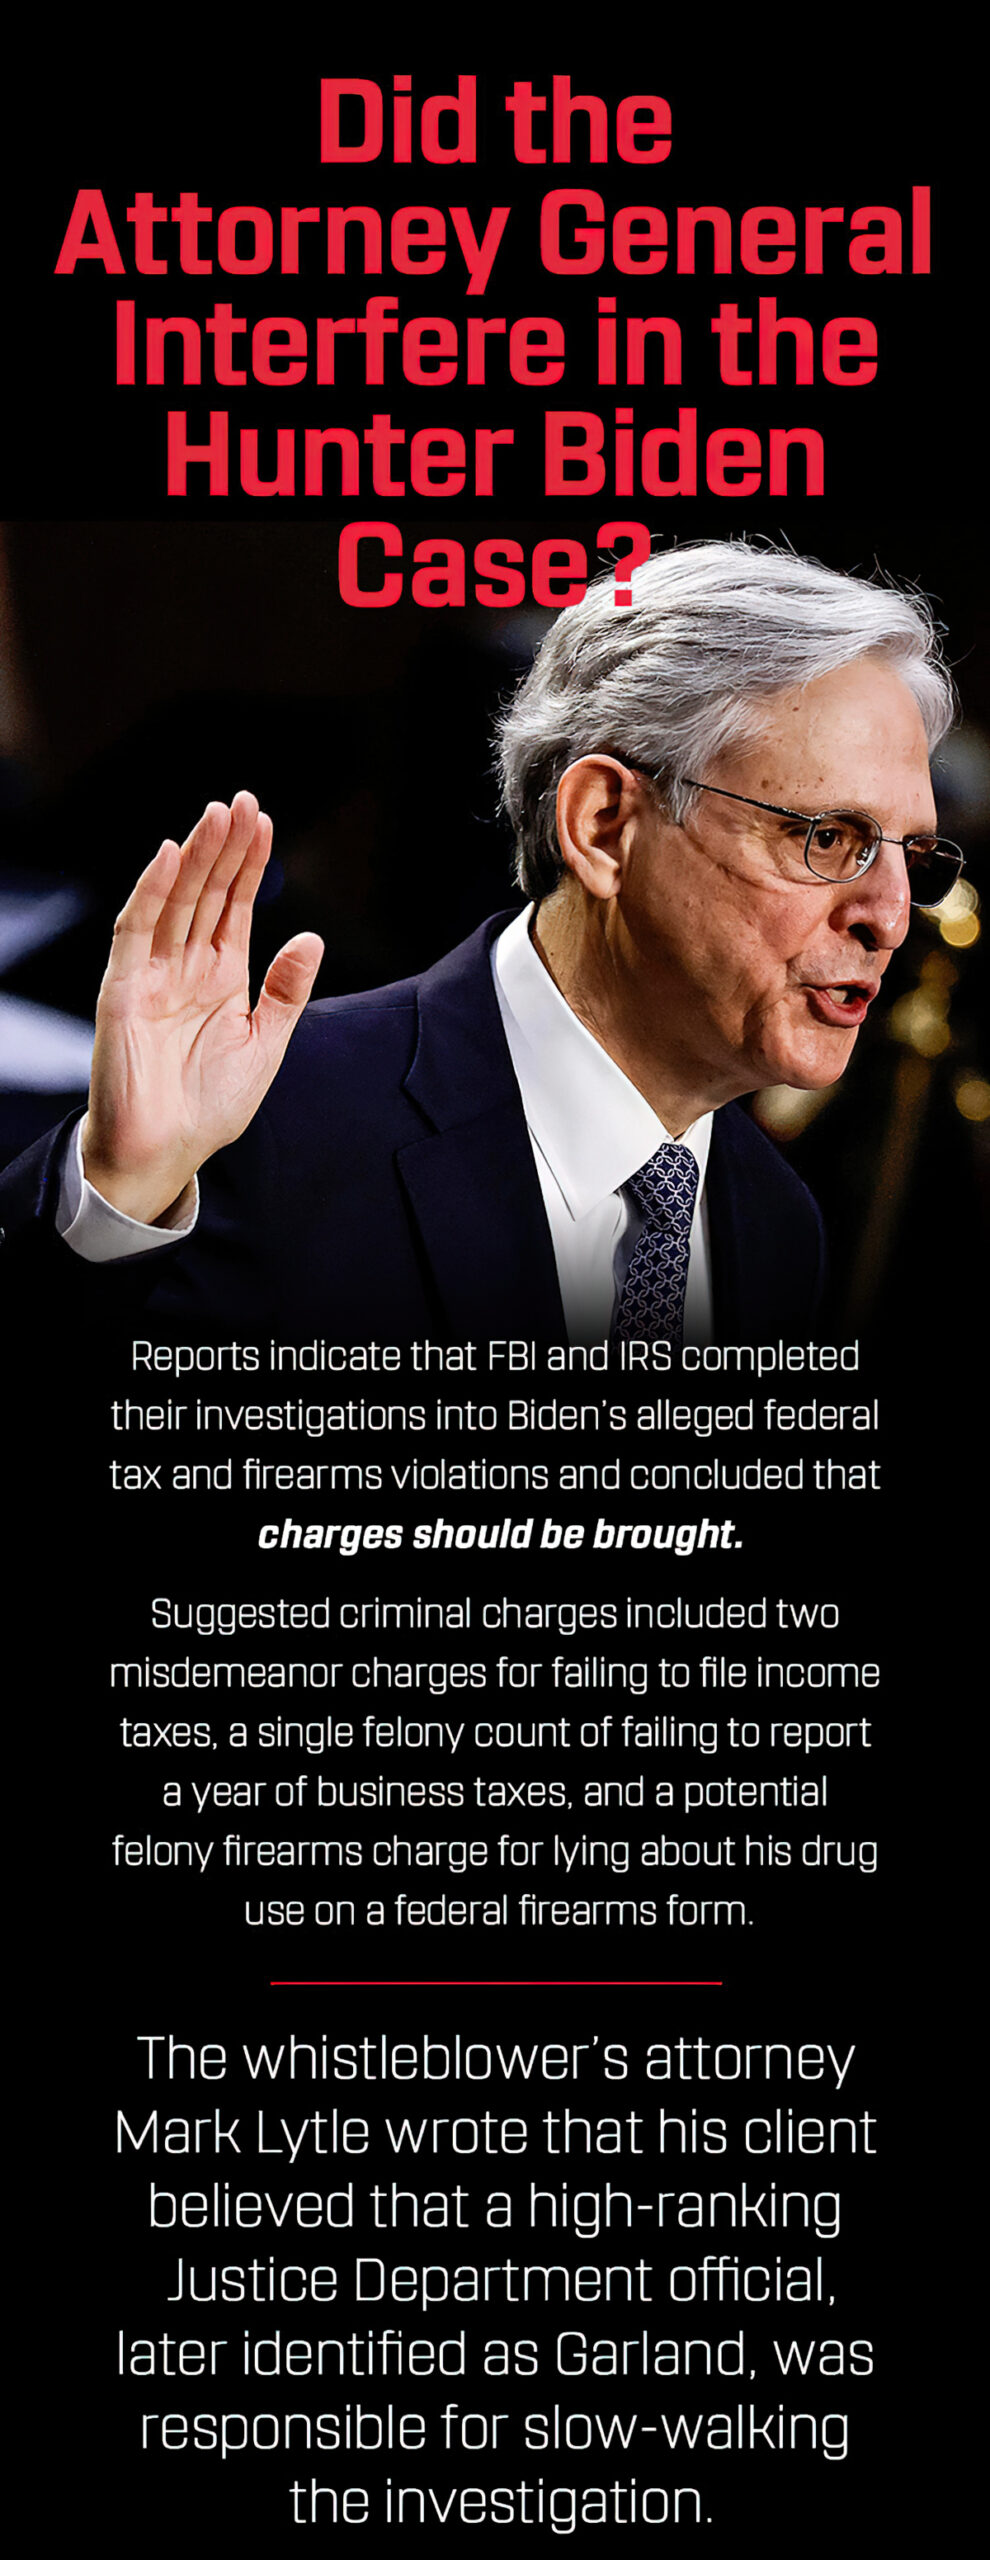 Poll - Should Attorney General Merrick Garland be fired immediately?